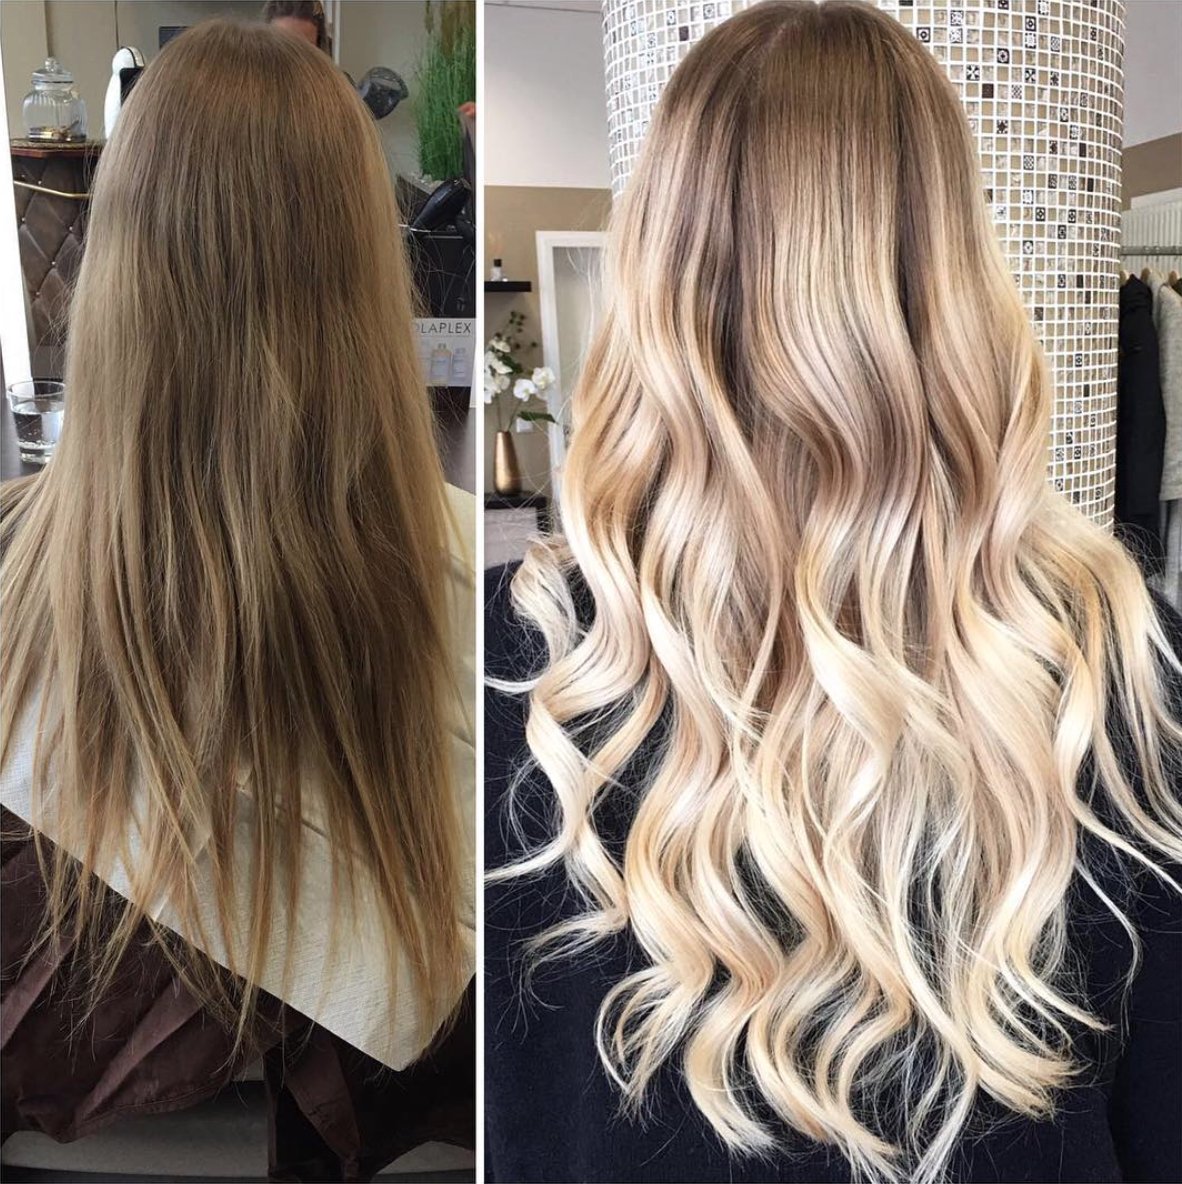 Olaplex on Twitter: "Balayage highlights and extensions with Olaplex to  keep the hair healthy. Color by melina_best_friseur (on IG).  https://t.co/OfdgpP57Nz" / Twitter